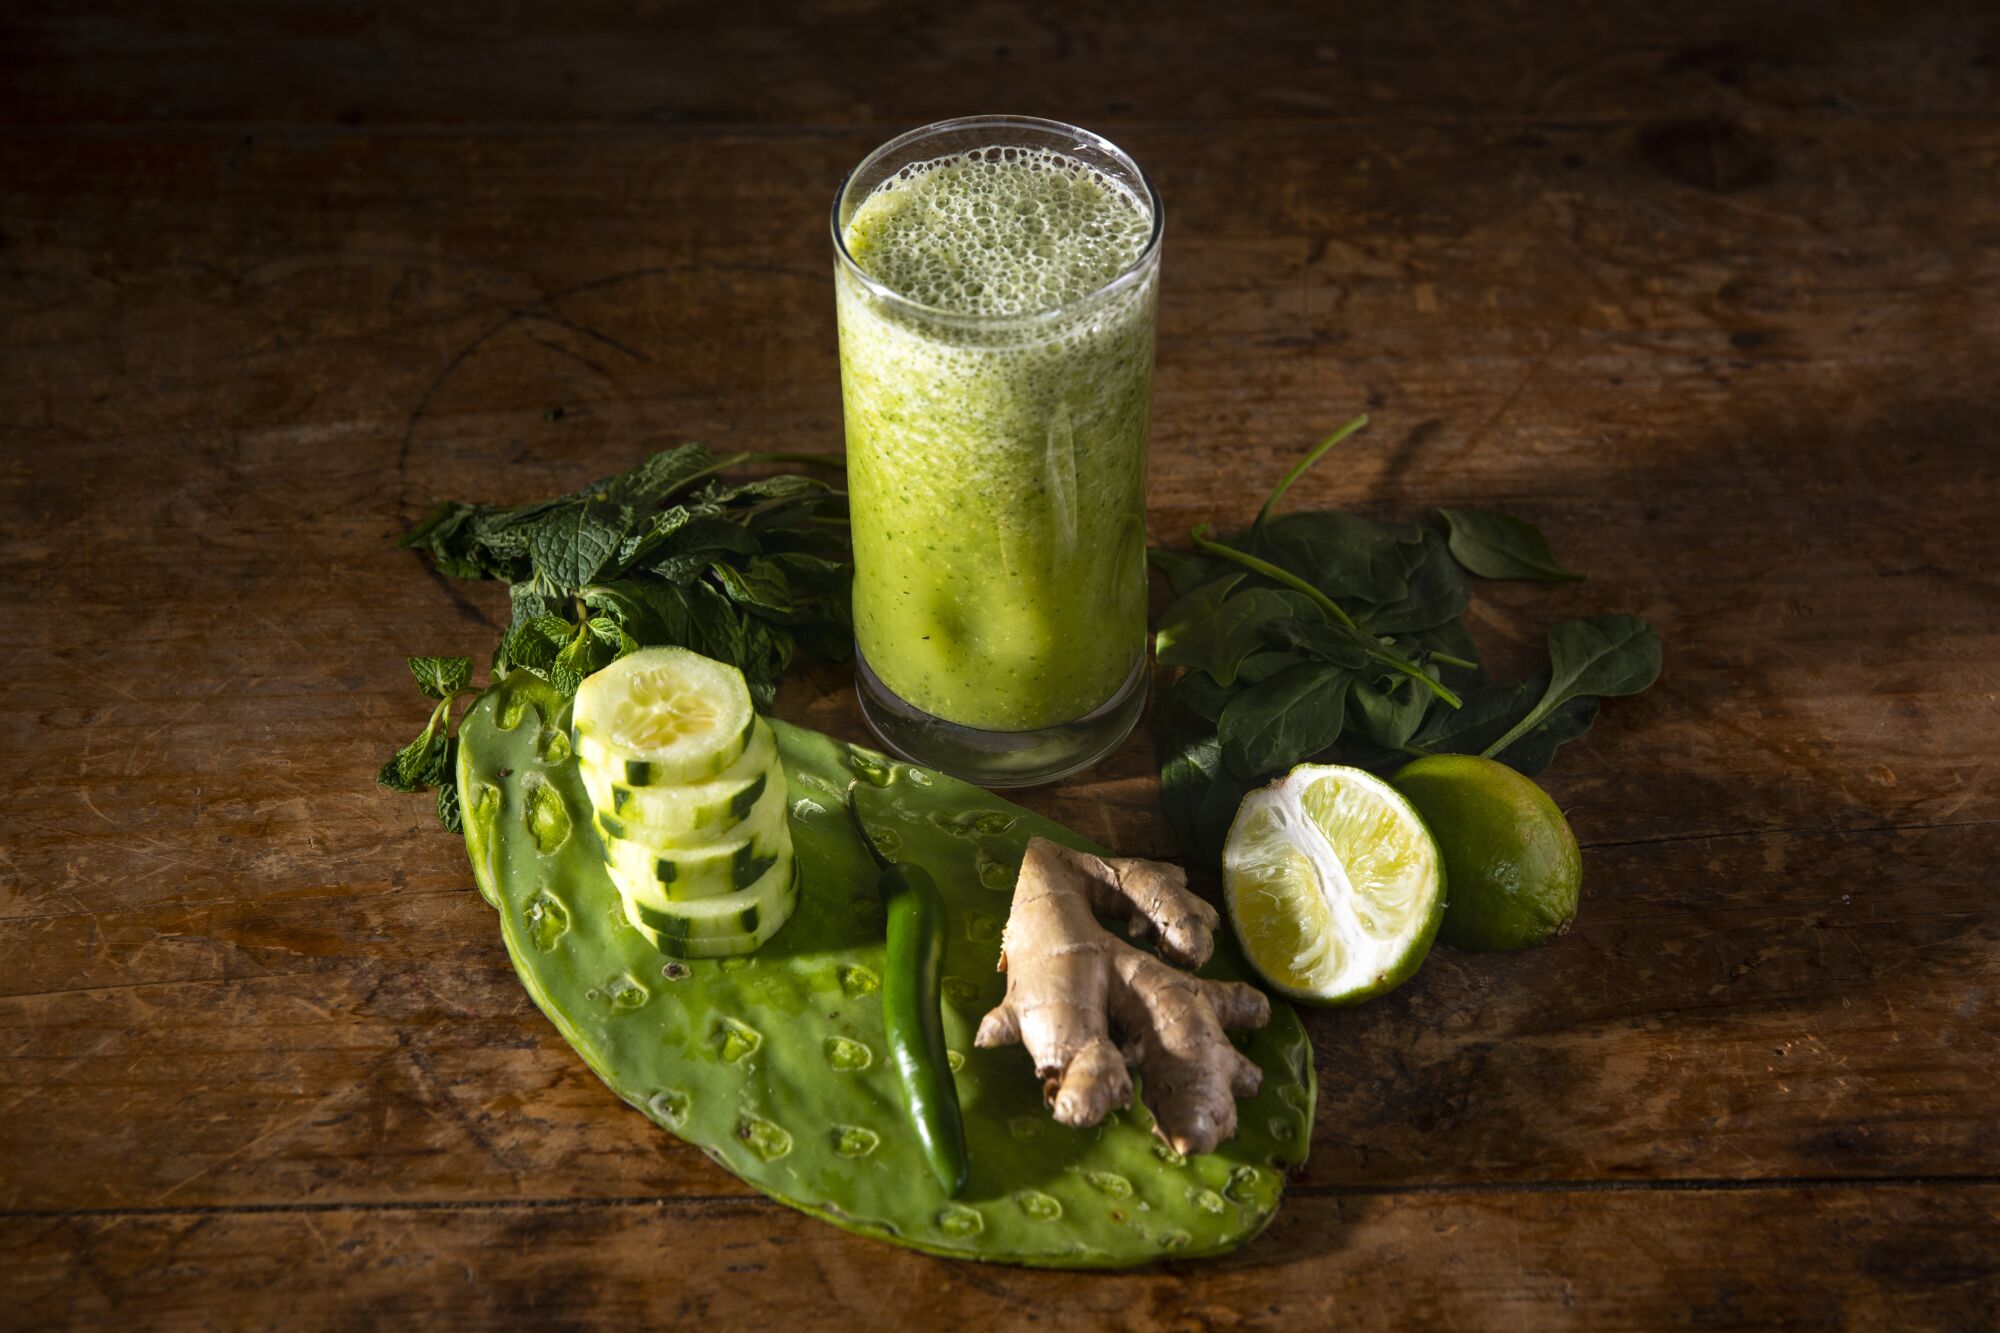 If you're watching your intake of natural sugars, go with the health-food store green juices — those are heavy on veggies.